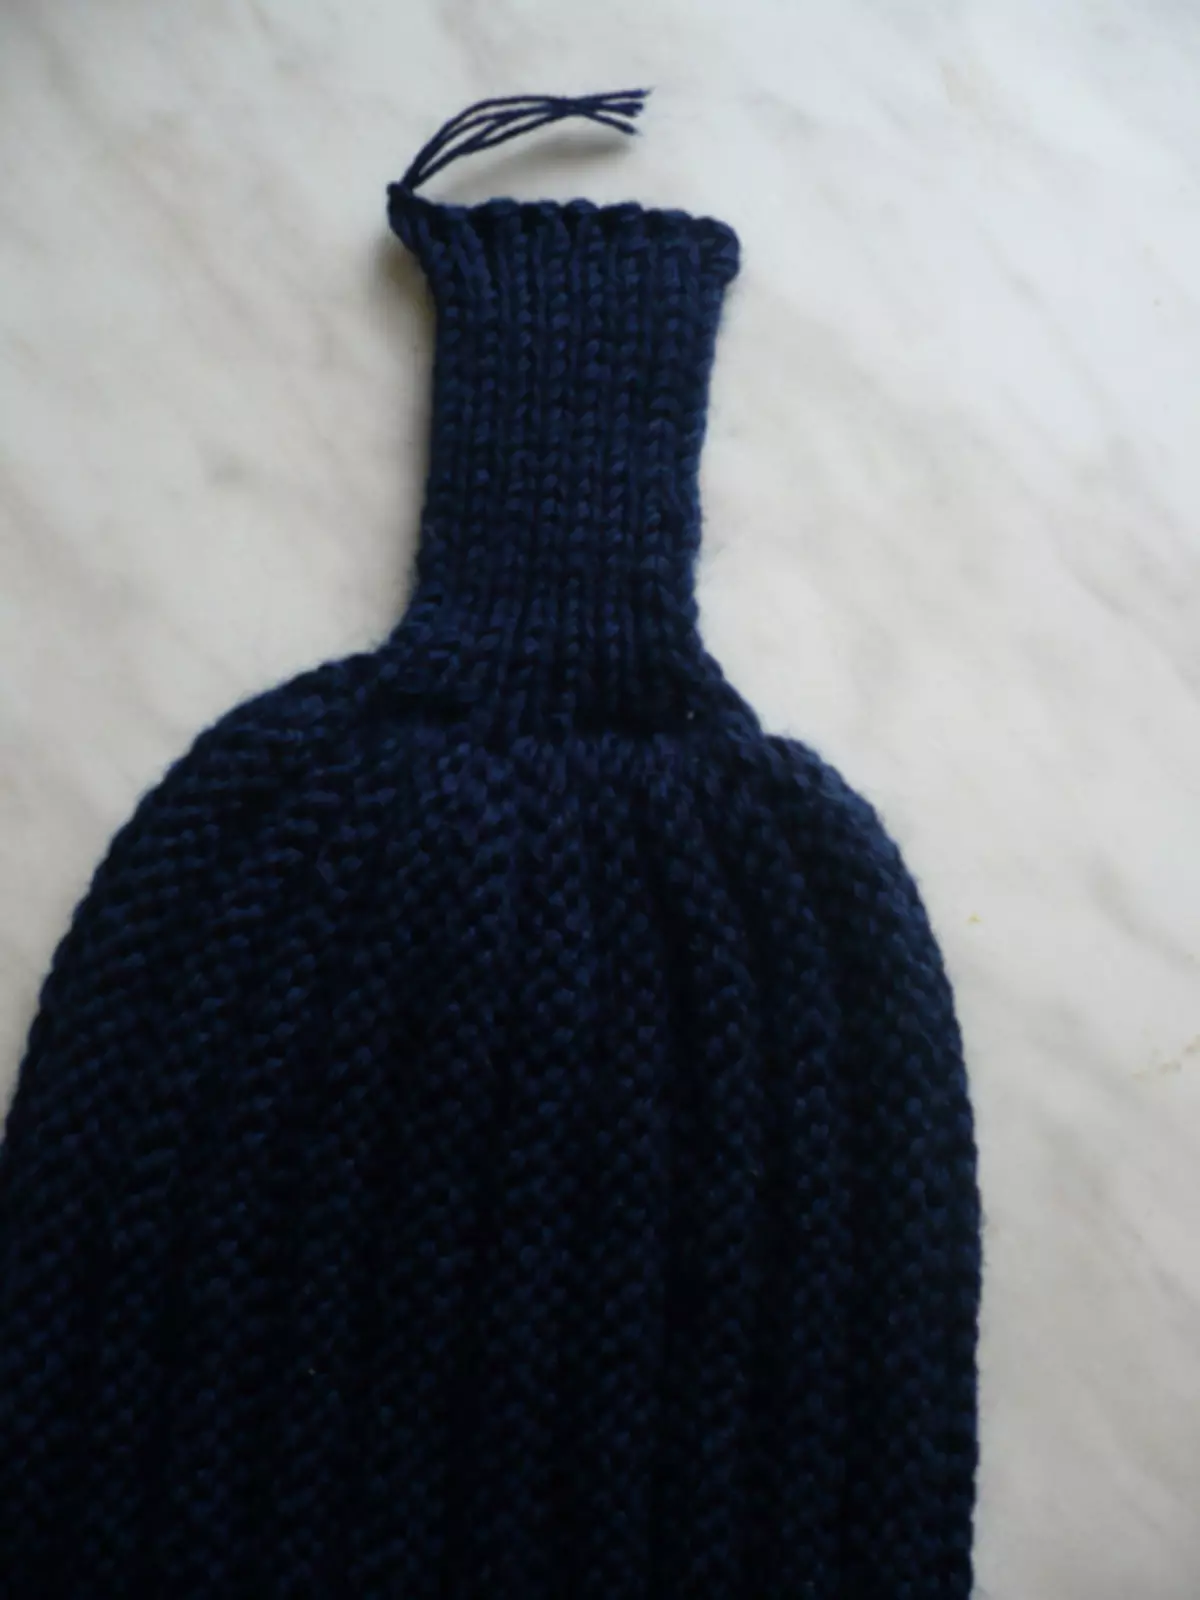 Chalma knitting with a scheme and description: Master class with photos and video